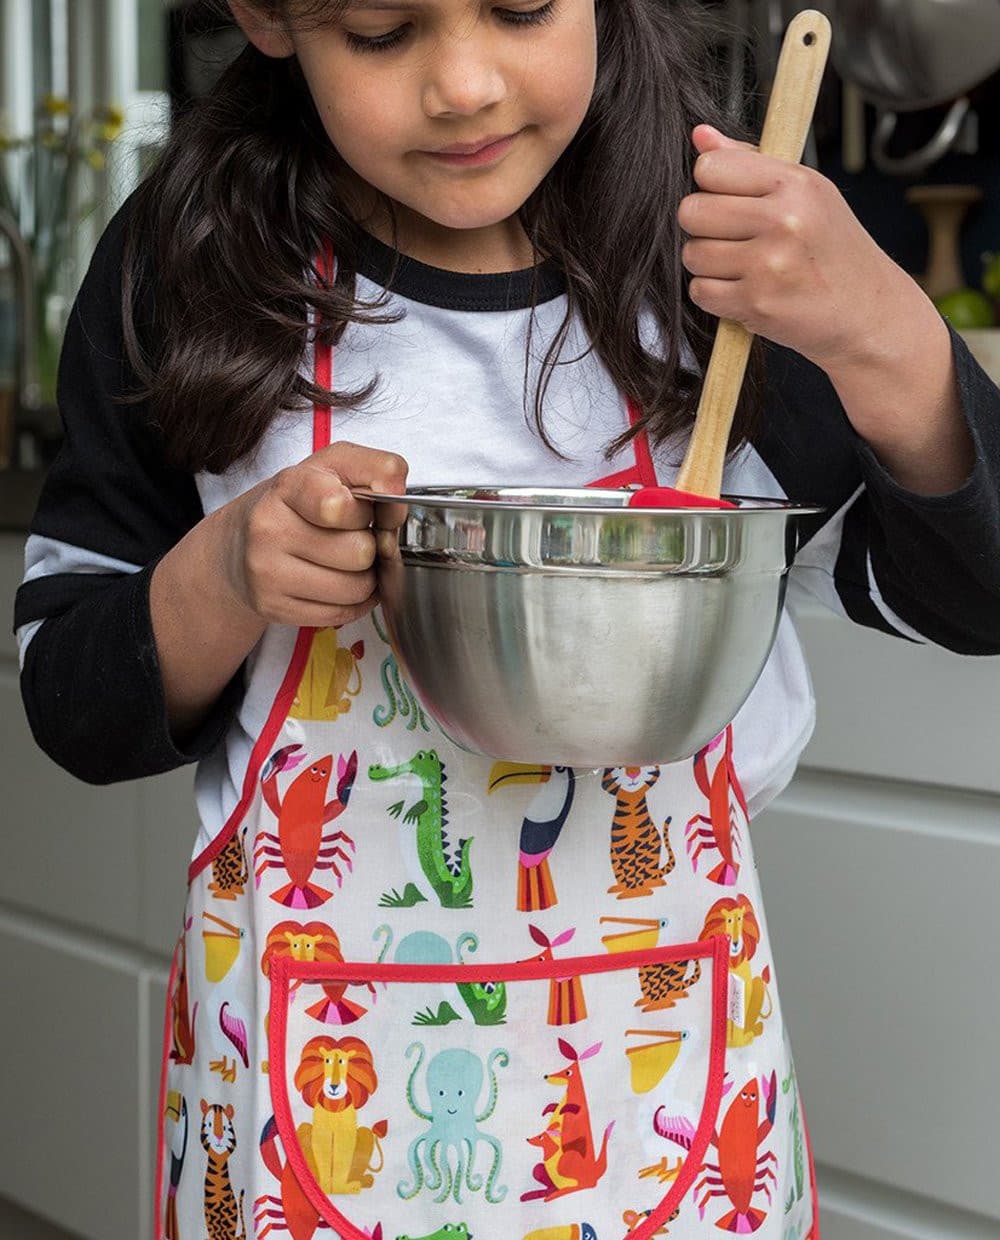 Animal Design Wipe Clean Kids Aprons from Rex